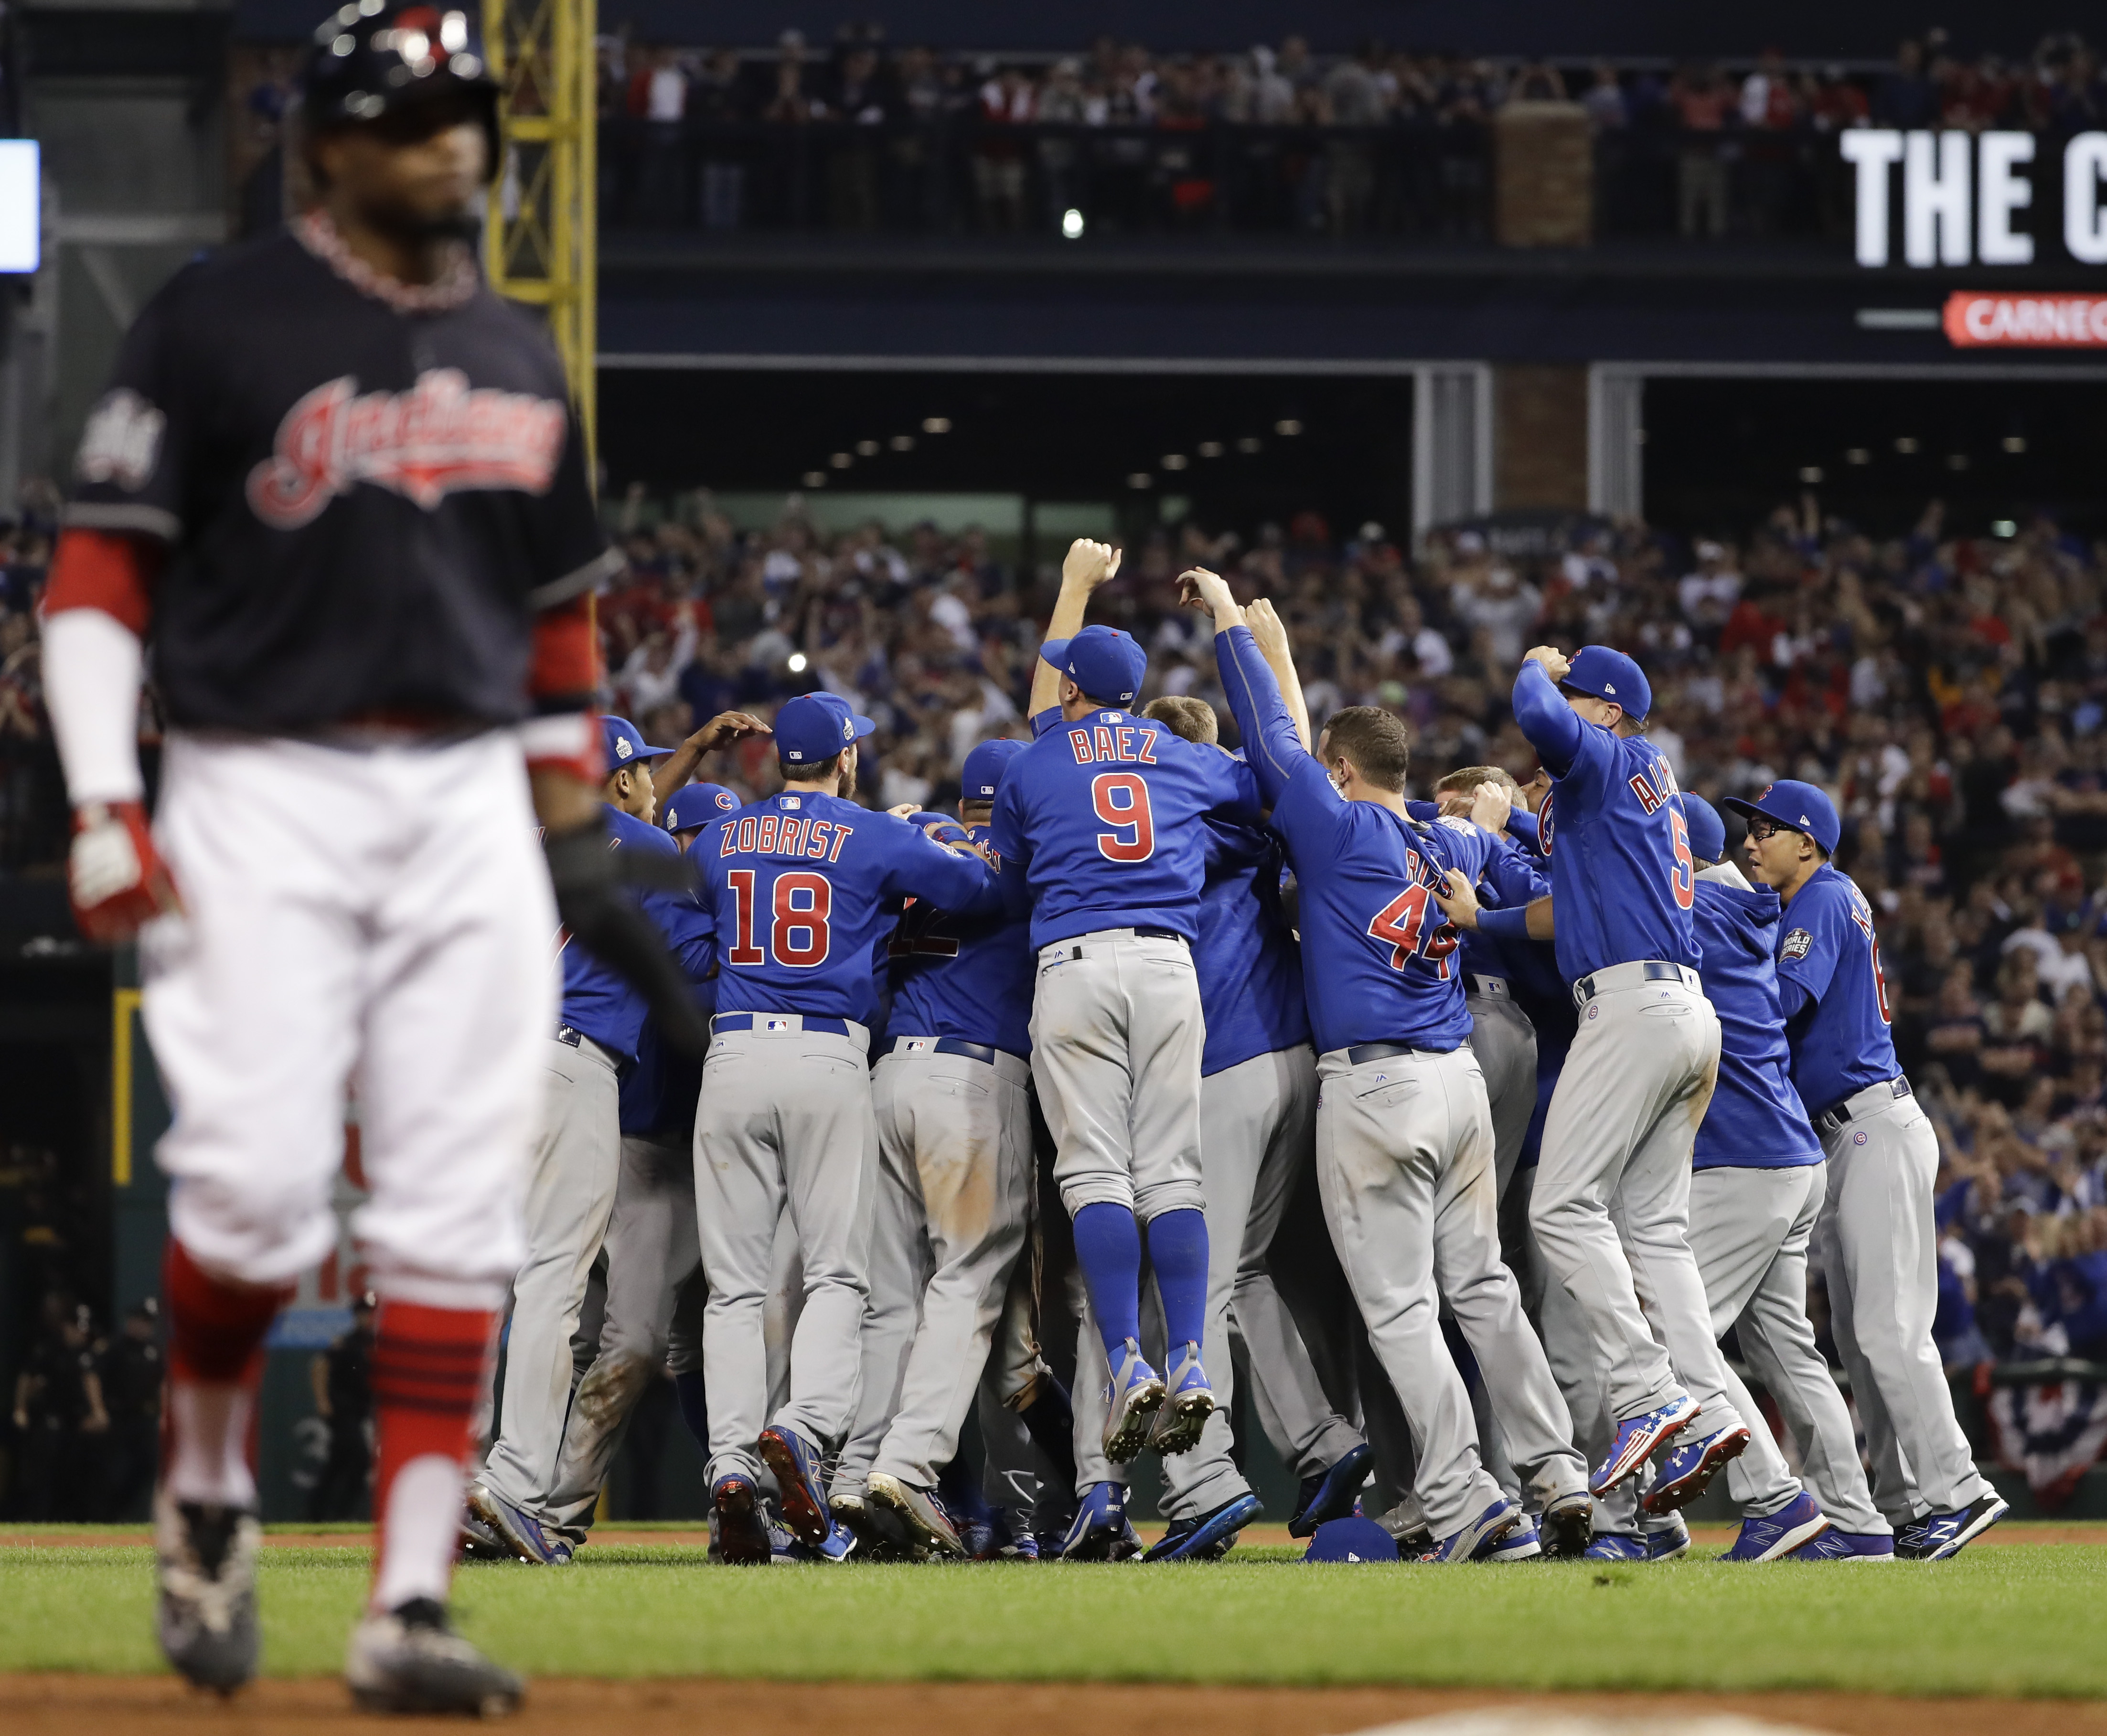 Cubs win first series title since 1908, beat Indians in game 7